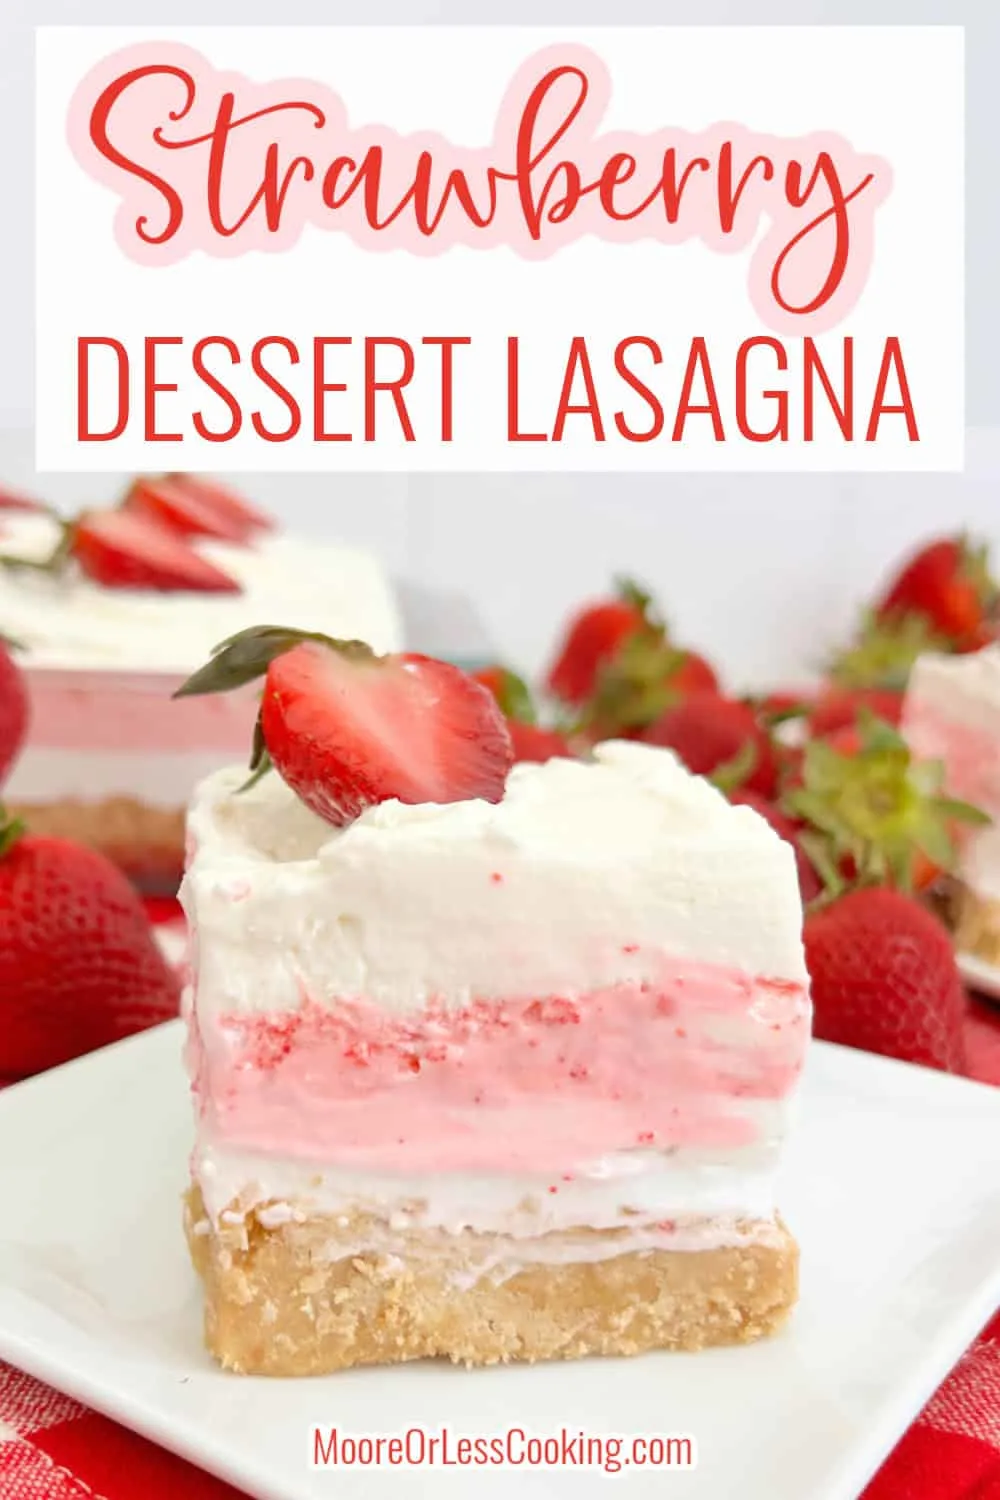 Layers of sweet, creamy and fruity ingredients are what make this Strawberry Dessert Lasagna a delightful crowd pleaser. The buttery Oreo crust is slathered with dreamy and sweet cream cheese that's followed by a fruity strawberry layer before being crowned with a fluffy layer of whipped topping and garnished with ruby red strawberries for a lush finish. via @Mooreorlesscook